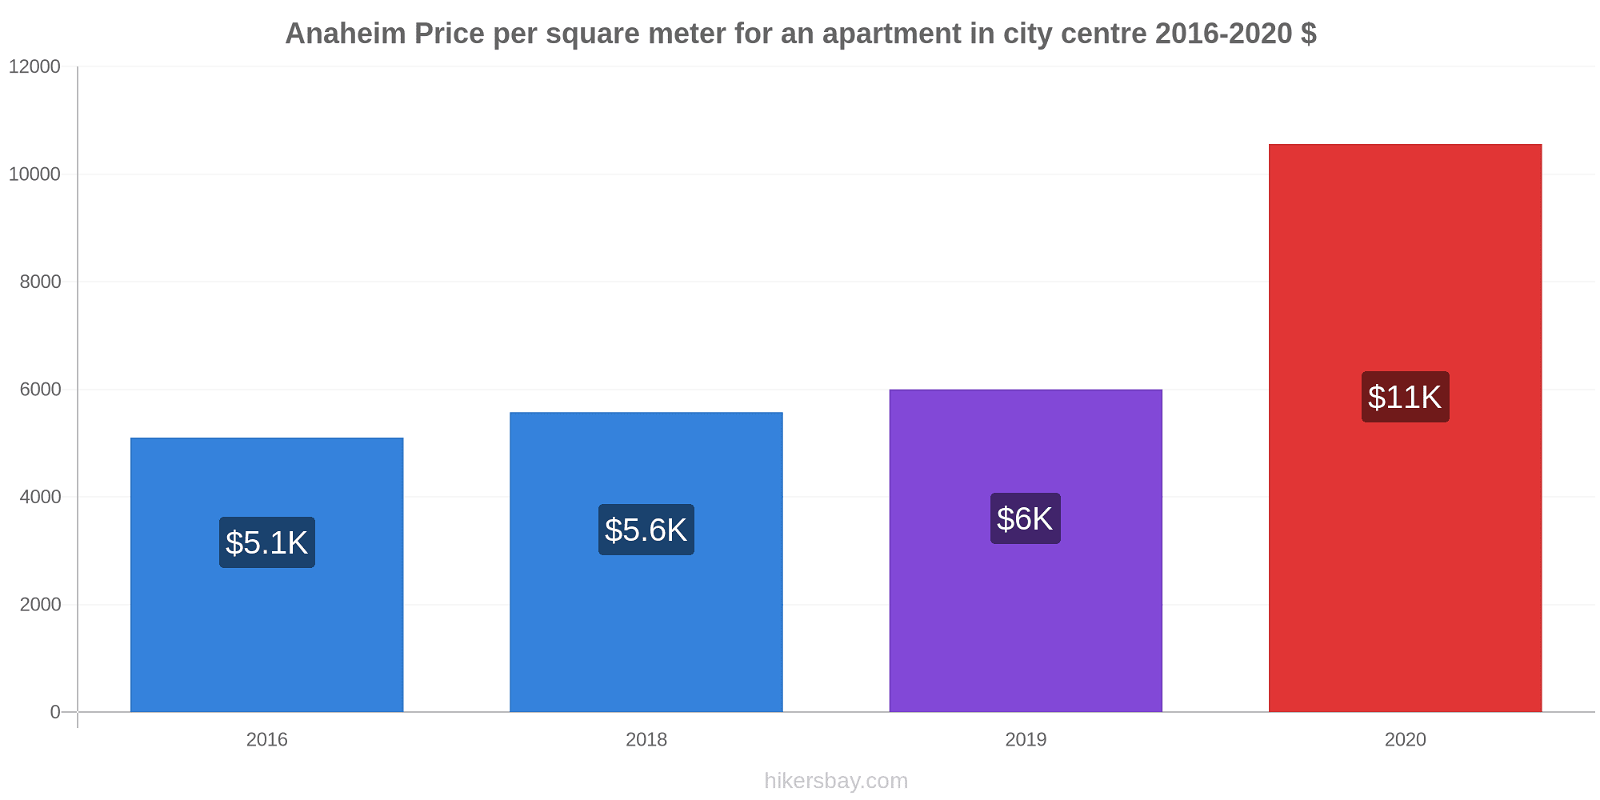 Anaheim price changes Price per square meter for an apartment in city centre hikersbay.com